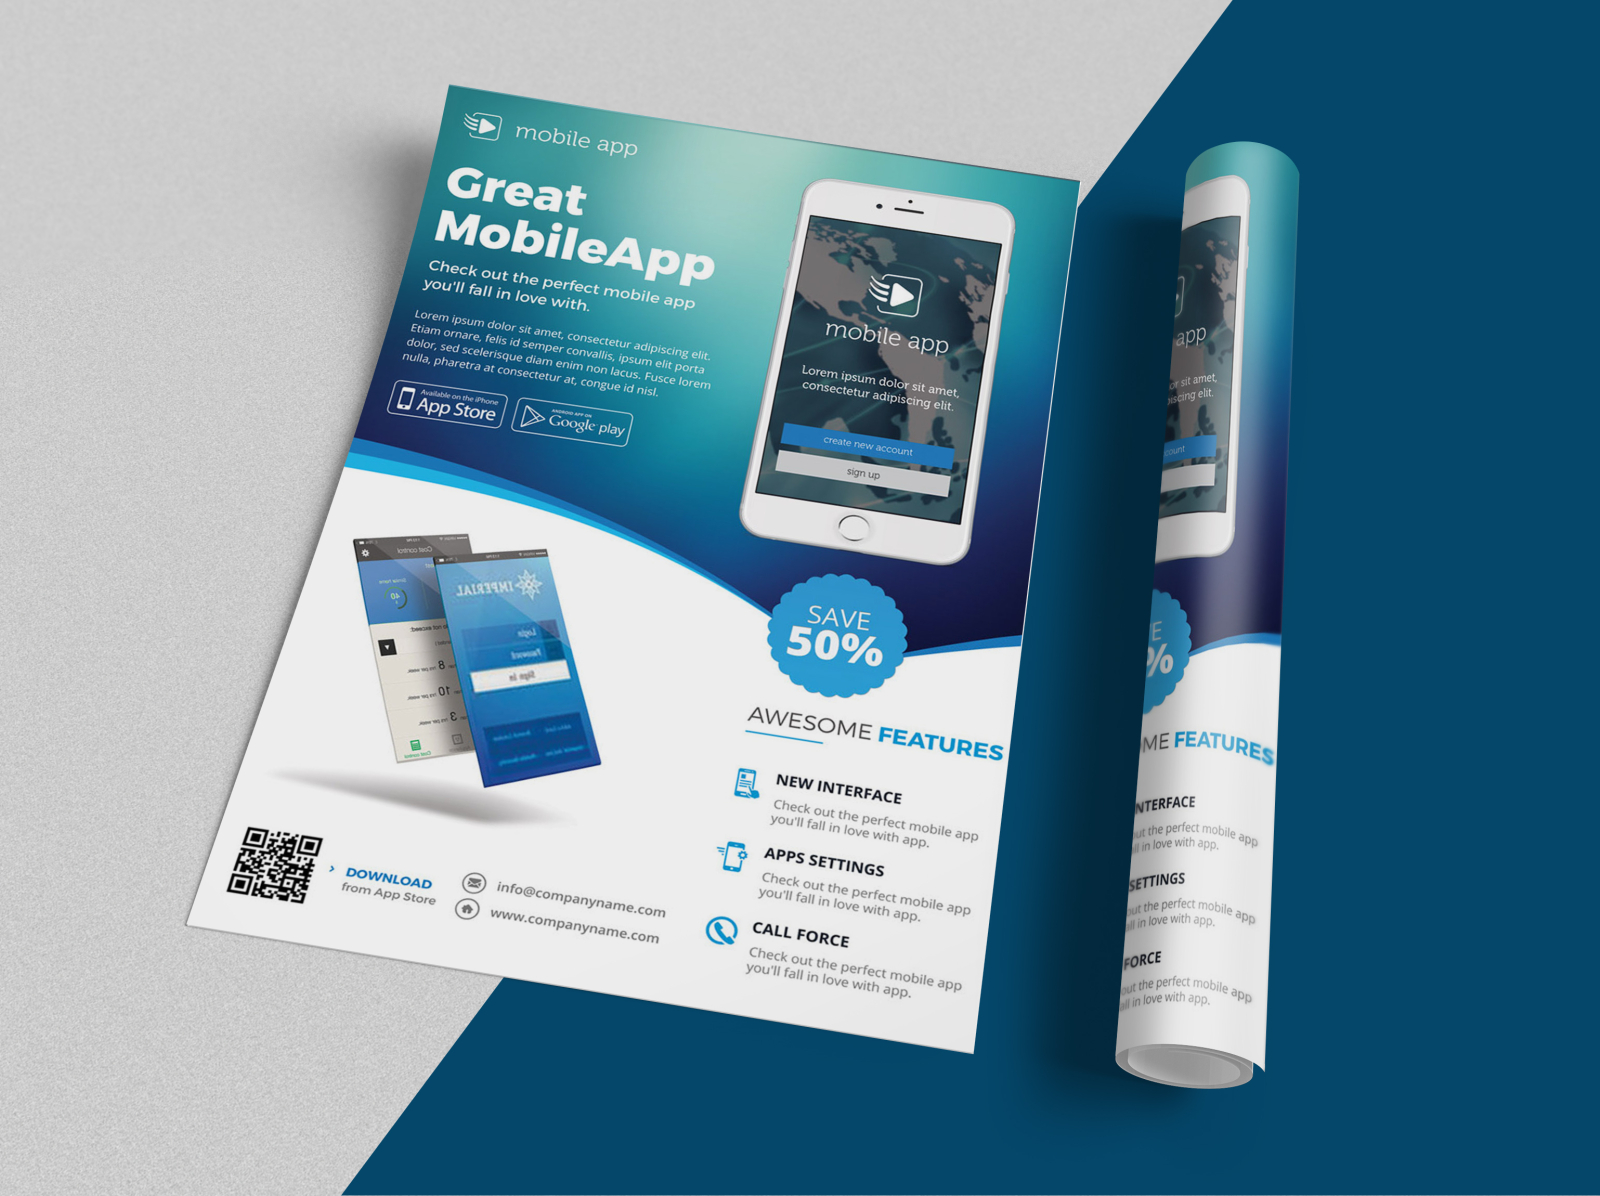 Download Free A4/A2 Leaflet / Flyers Mockups by Graphic Design Junction on Dribbble